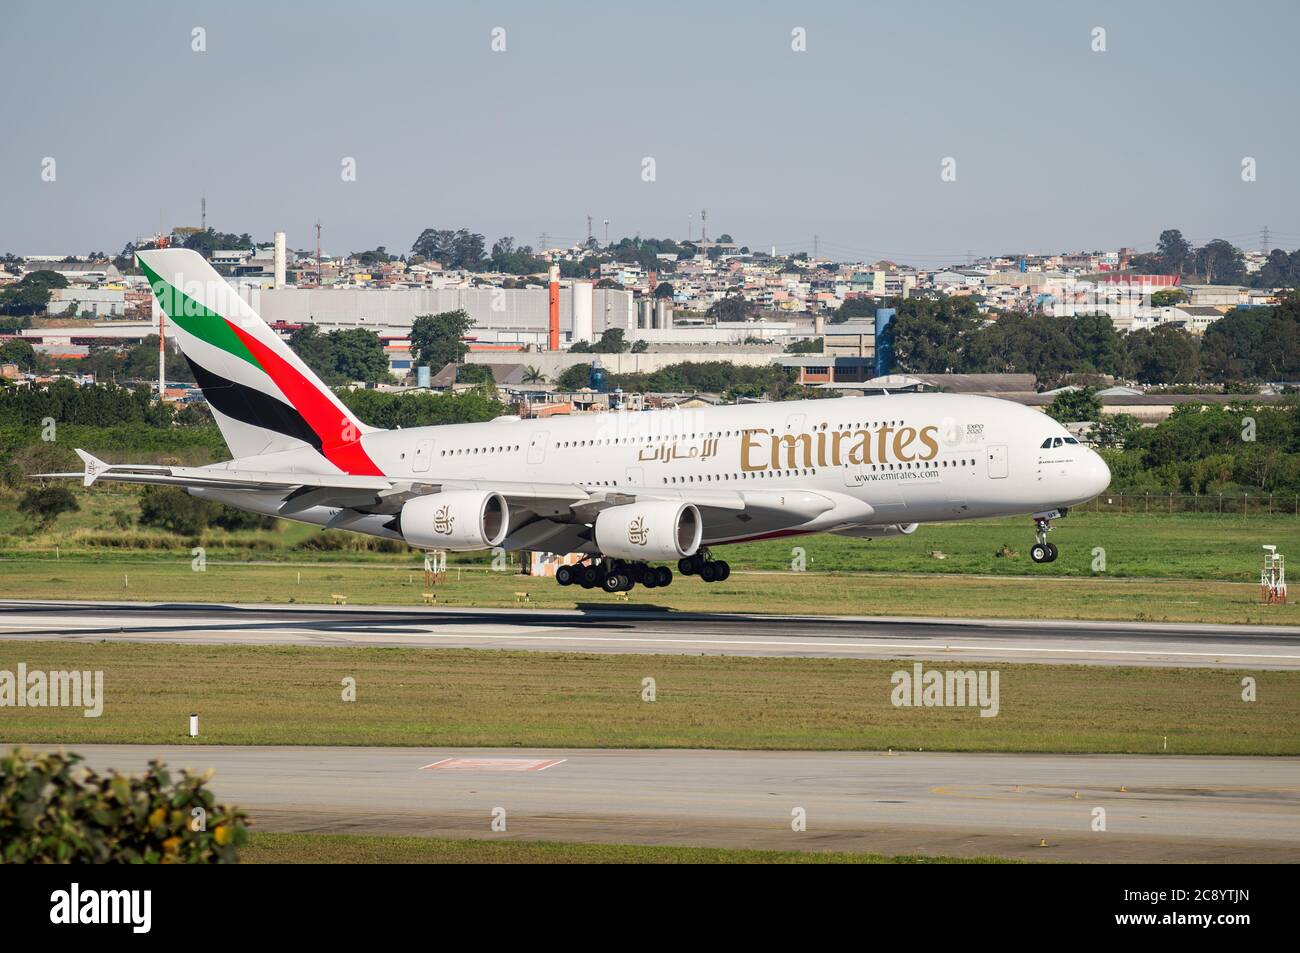 Emirates Airlines Airbus A380-800 (Wide-body aircraft - Reg. A6-EUT) moments before touch the runway 27R of Sao Paulo/Guarulhos International Airport. Stock Photo